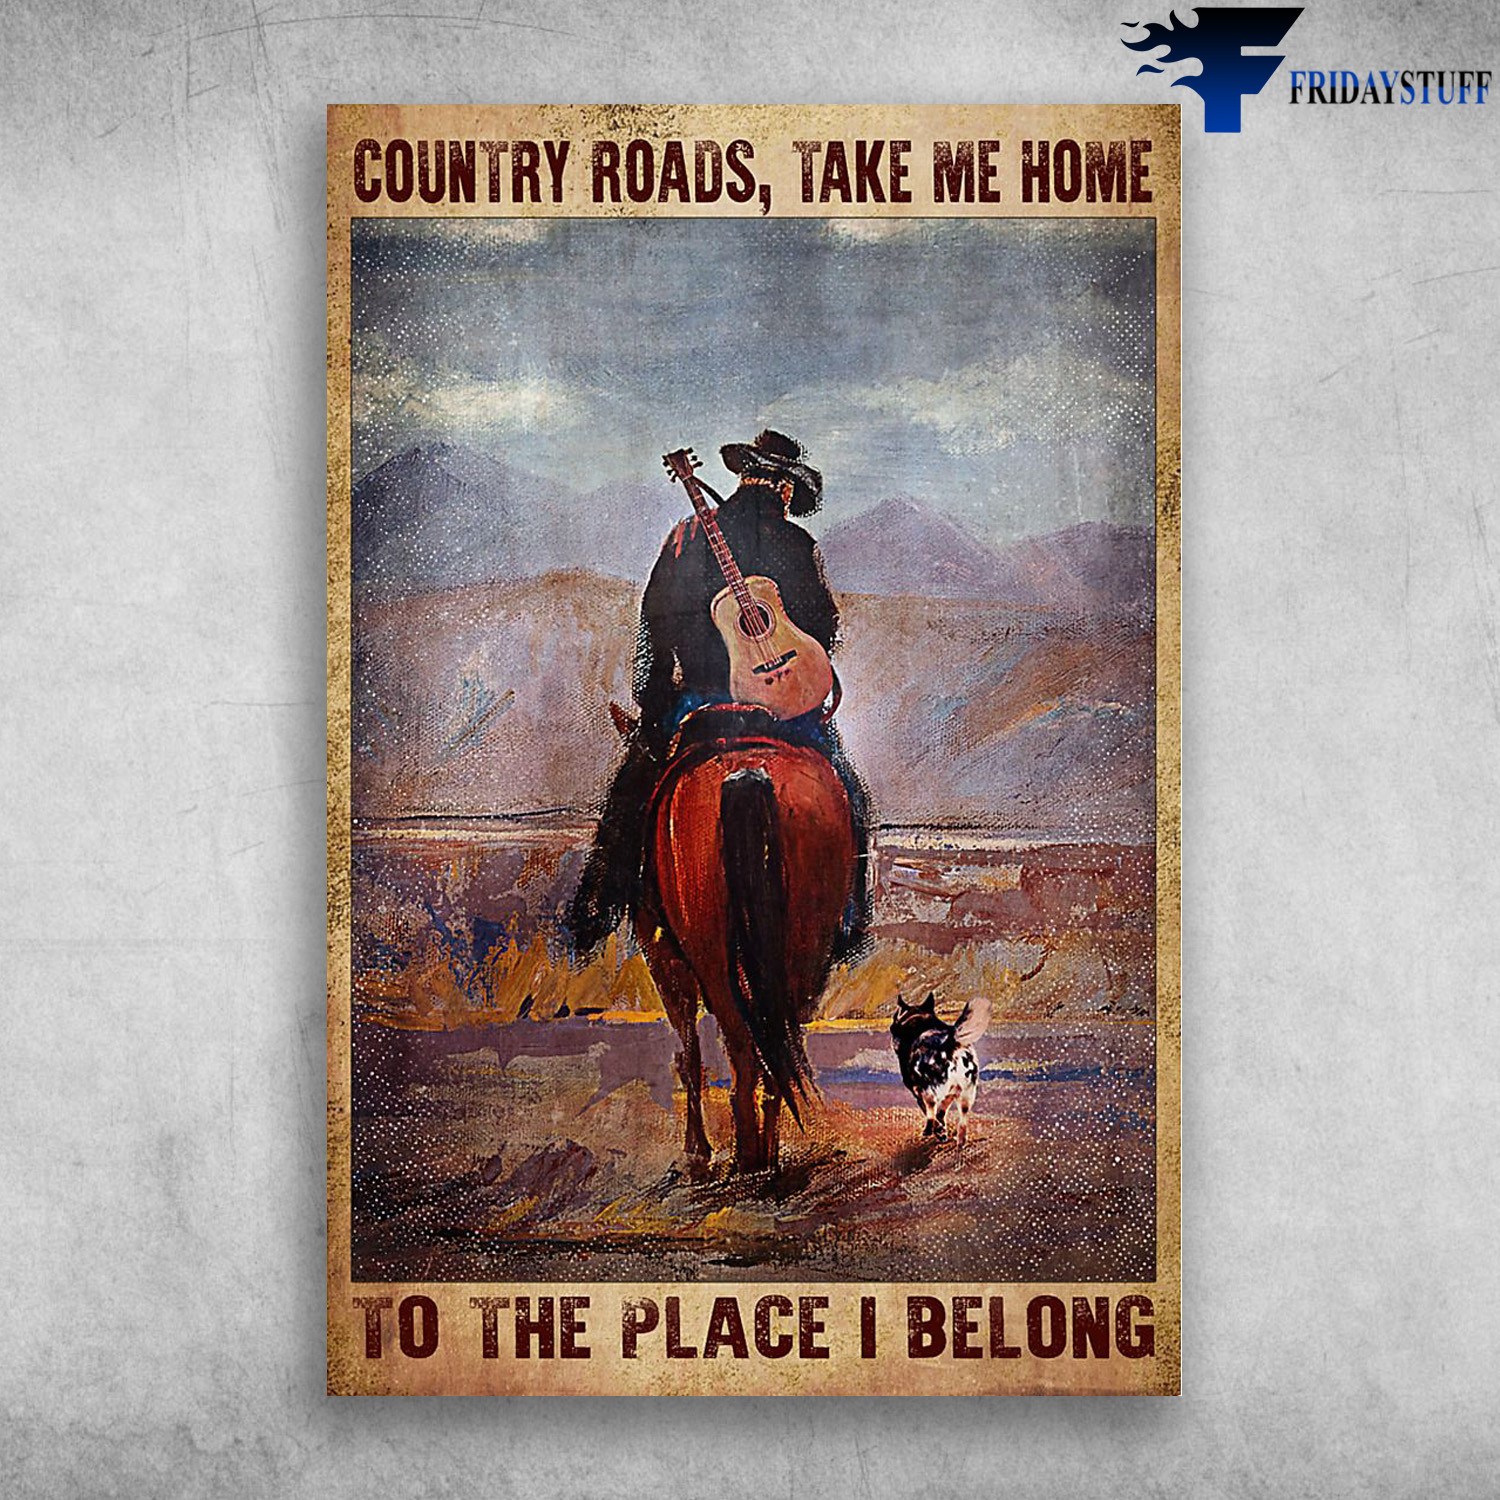 Cowboy Riding Horse And A Dog - Country Roads, Take Me Home, To The Place I Belong